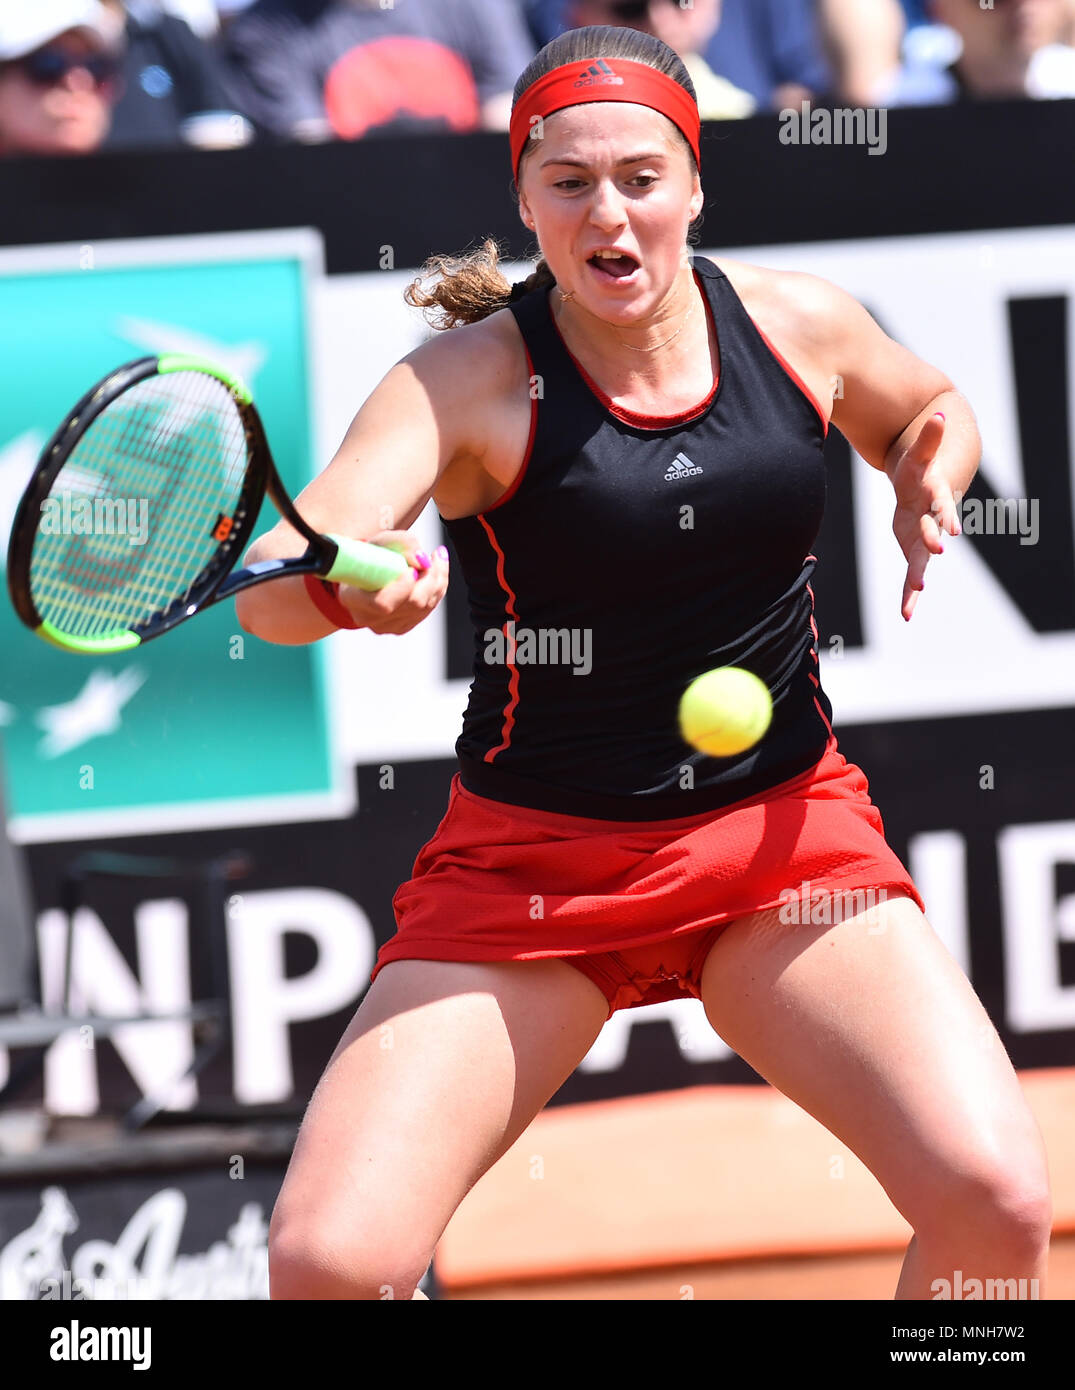 Rome, Italy. 17th May, 2018. International Tennis Championships-Rome  17-May-2018 In the picture Jelena Ostapenko Photo Photographer01 Credit:  Independent Photo Agency/Alamy Live News Stock Photo - Alamy